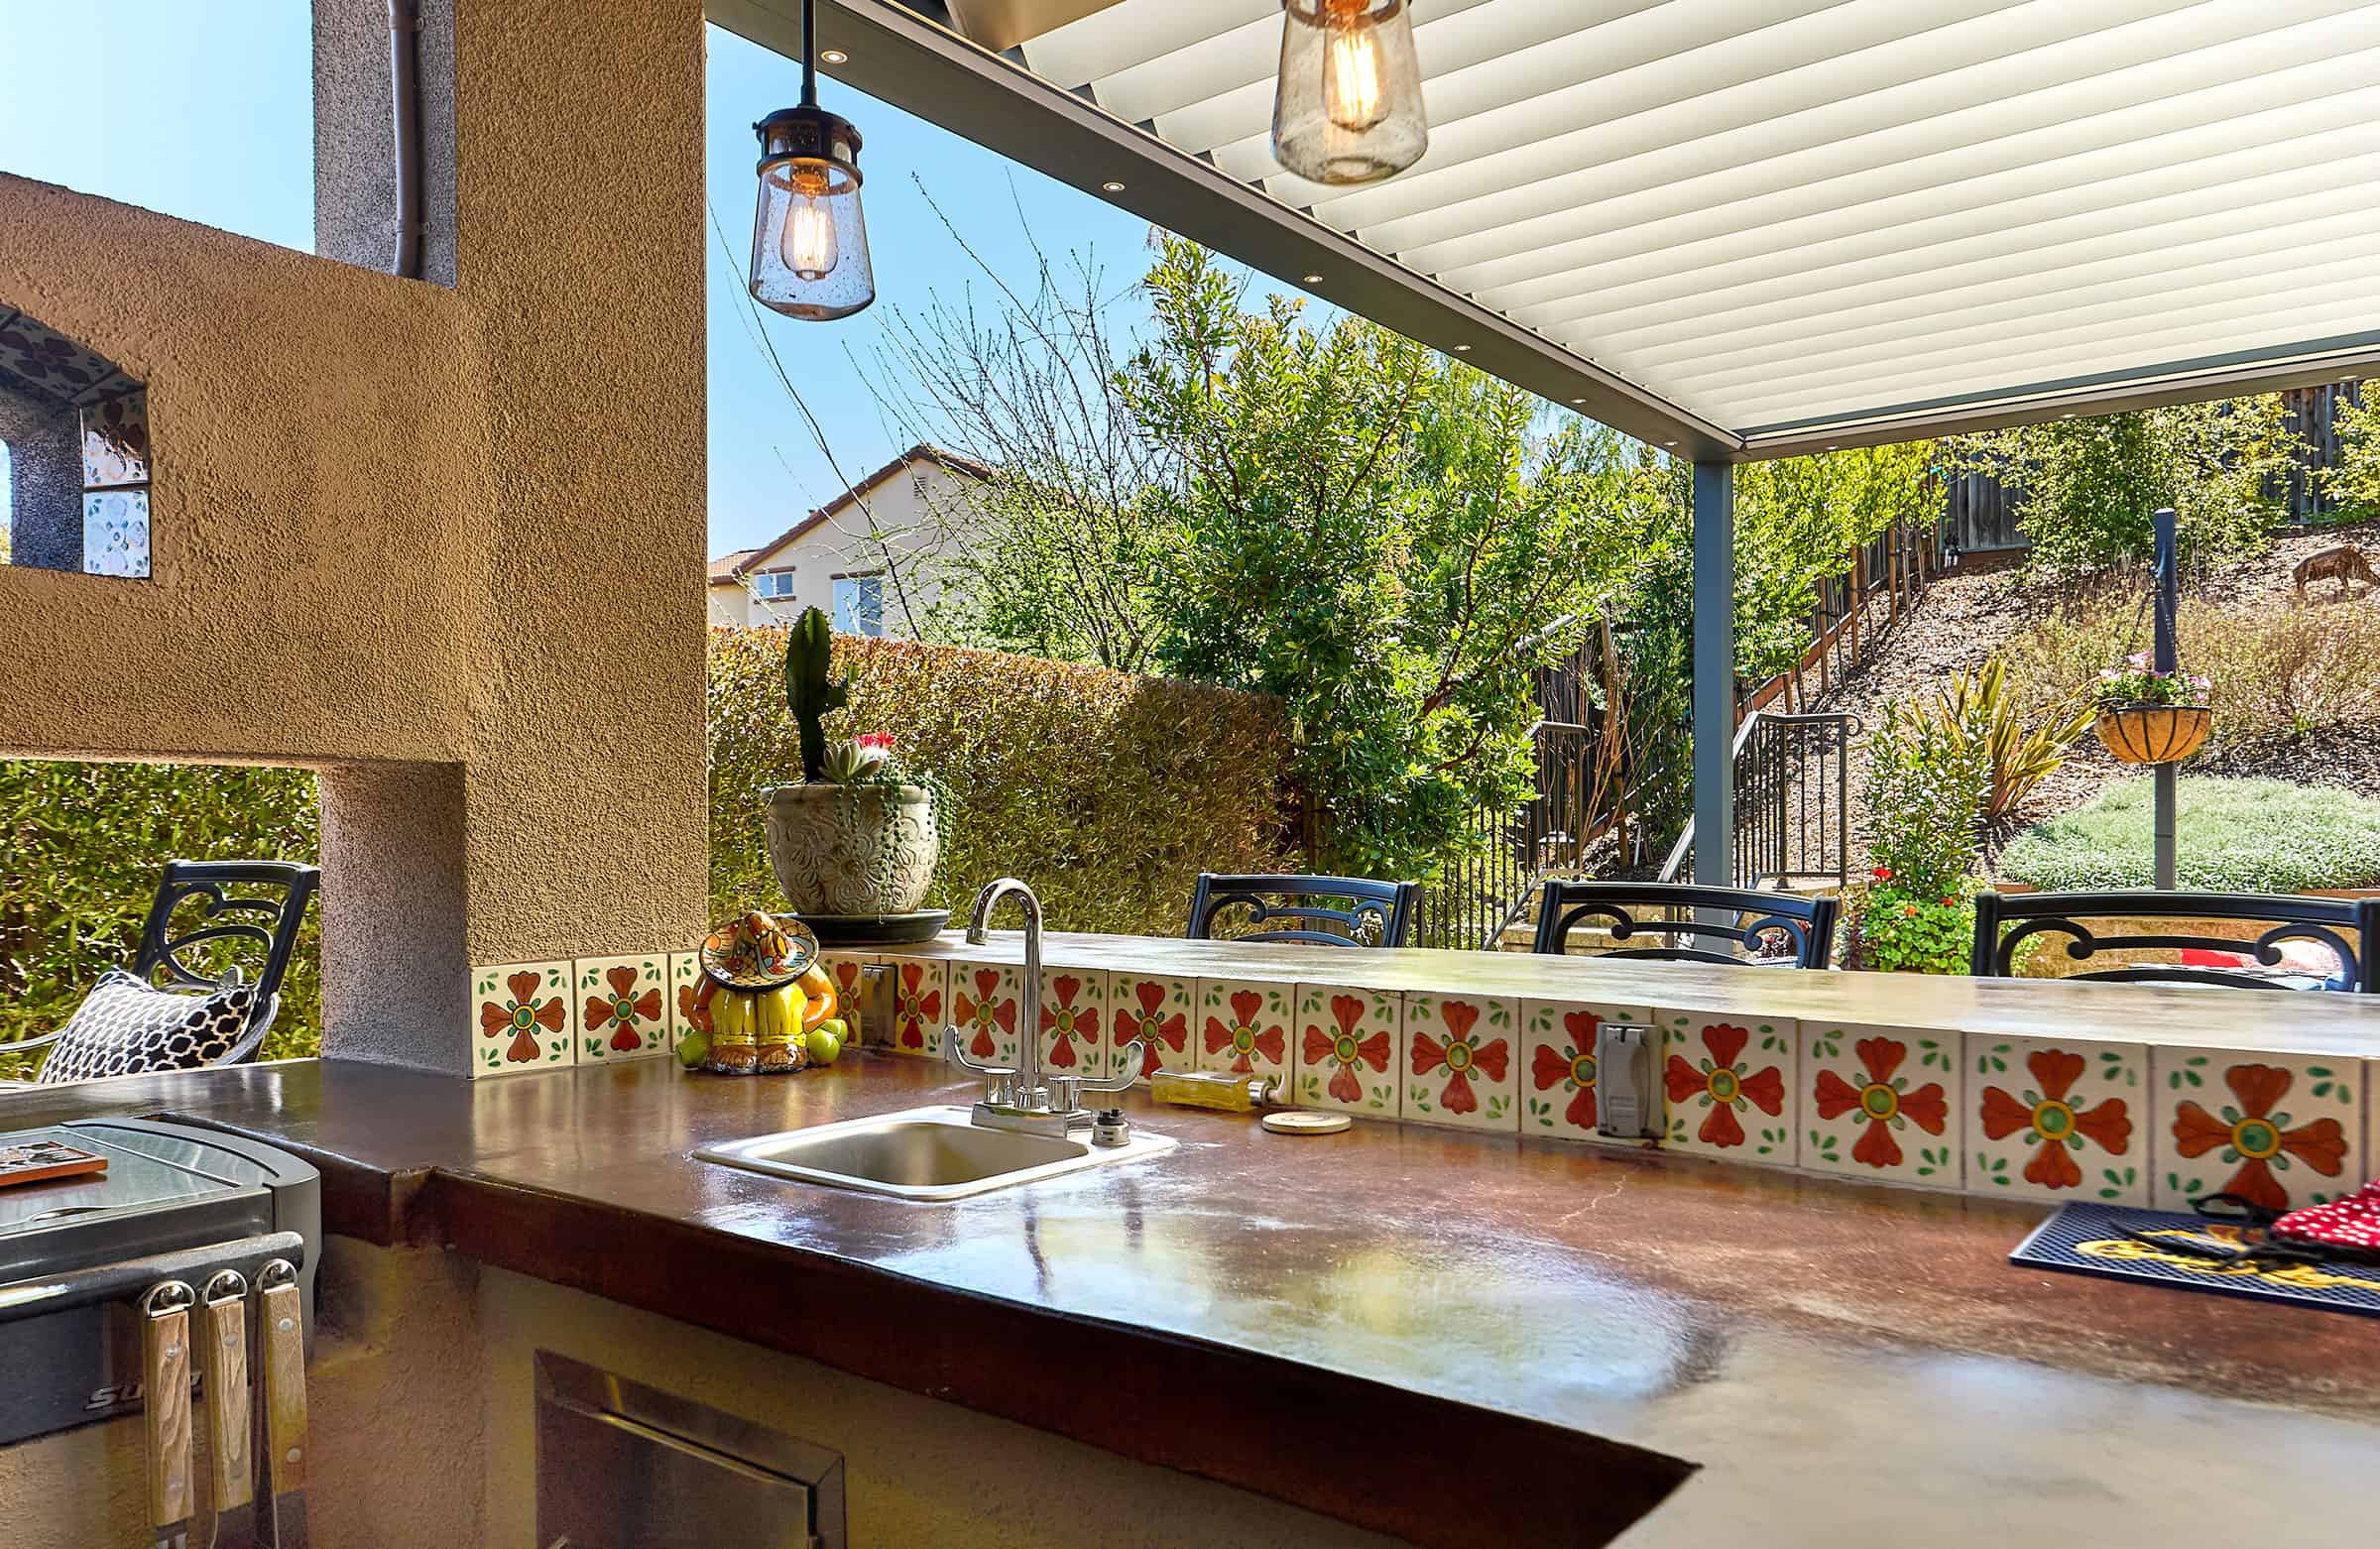 Pergolas by Julie - Outdoor Kitchen and BBQ Under Pergola Louvered Shade